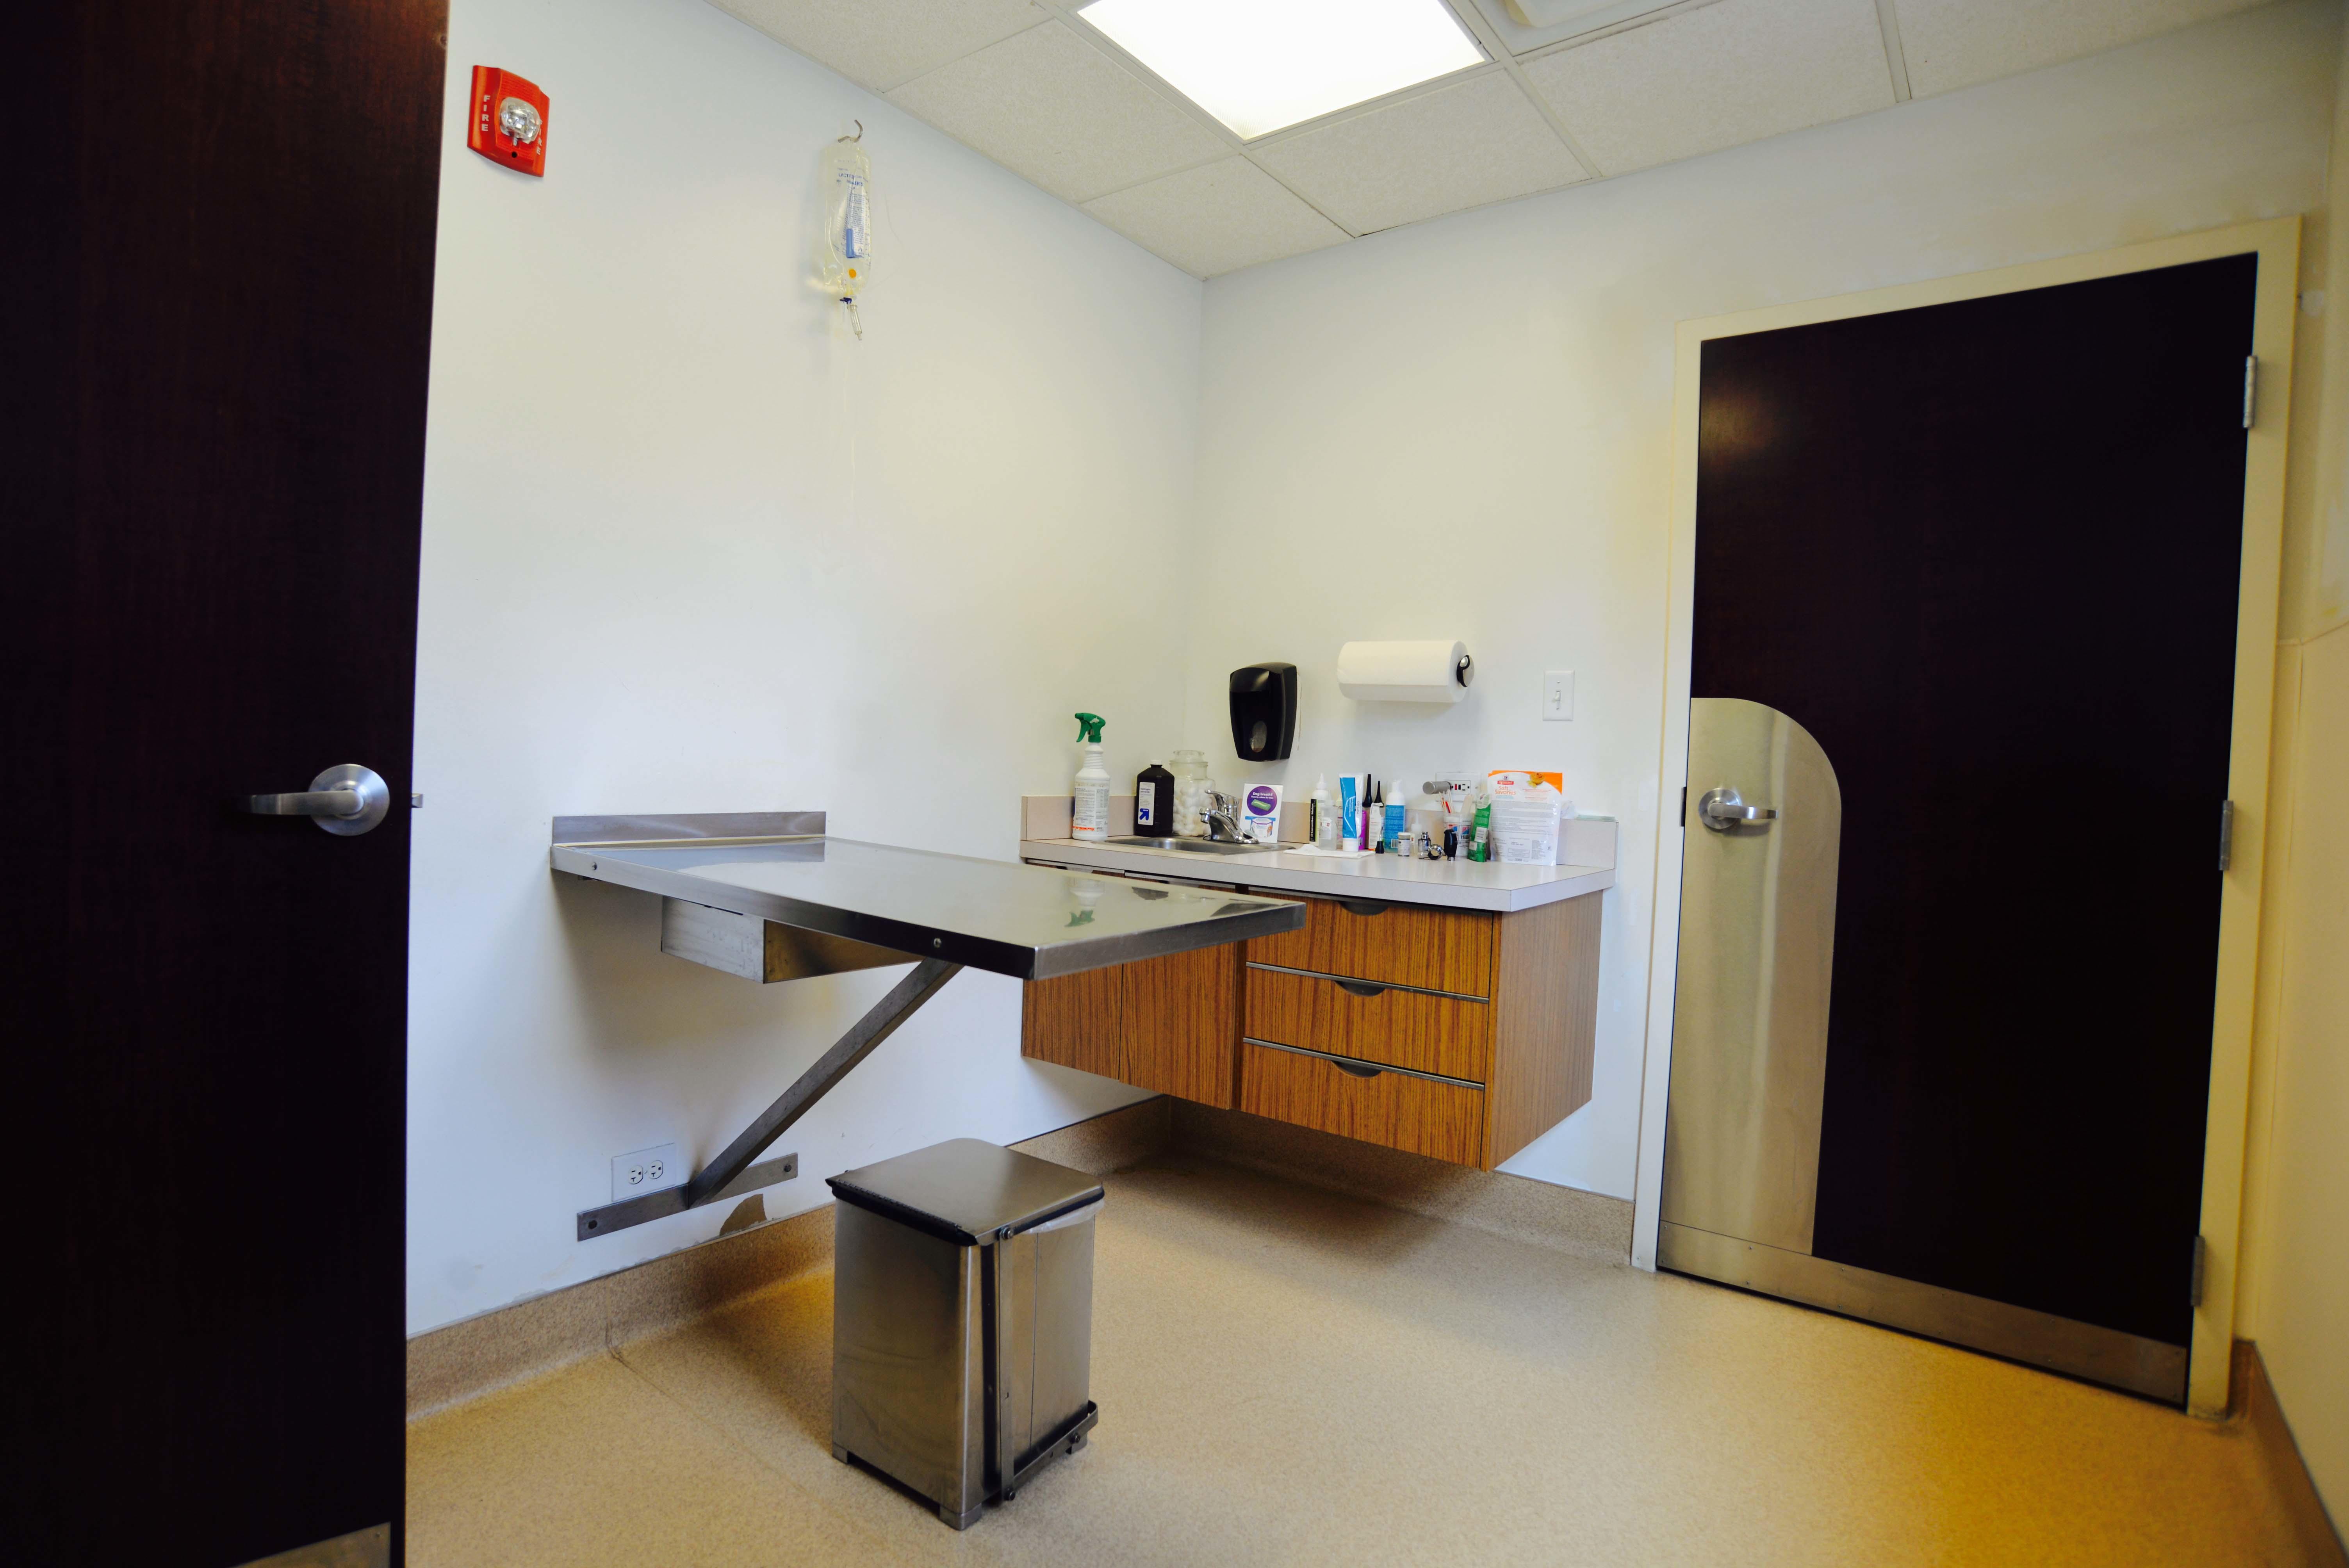 We pride ourselves on maintaining a bright, clean and welcoming facility.